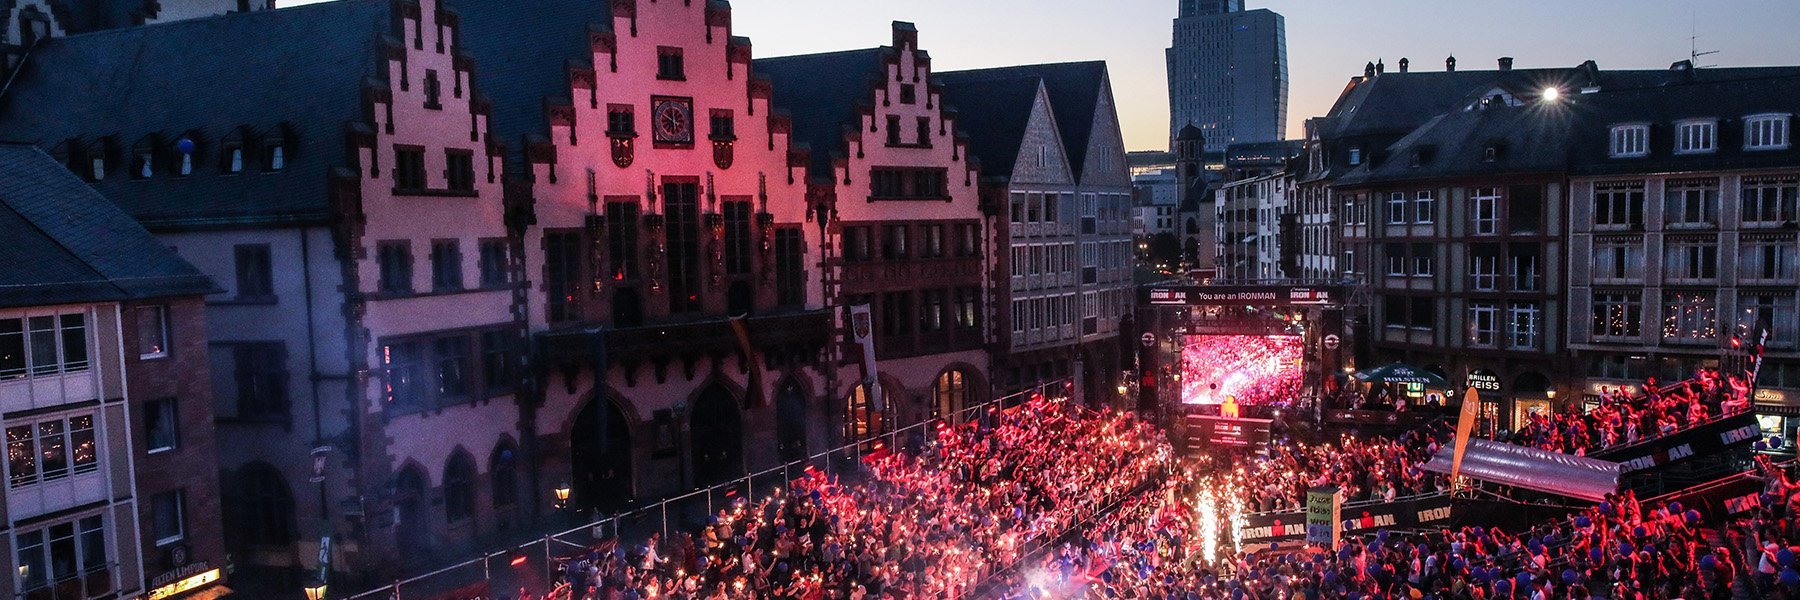 Magic finish line with little fireworks and balloons and  hundreds of people viewing and cheering on the athletes on the grandstands of the famous Römer in the city center of Frankfurt